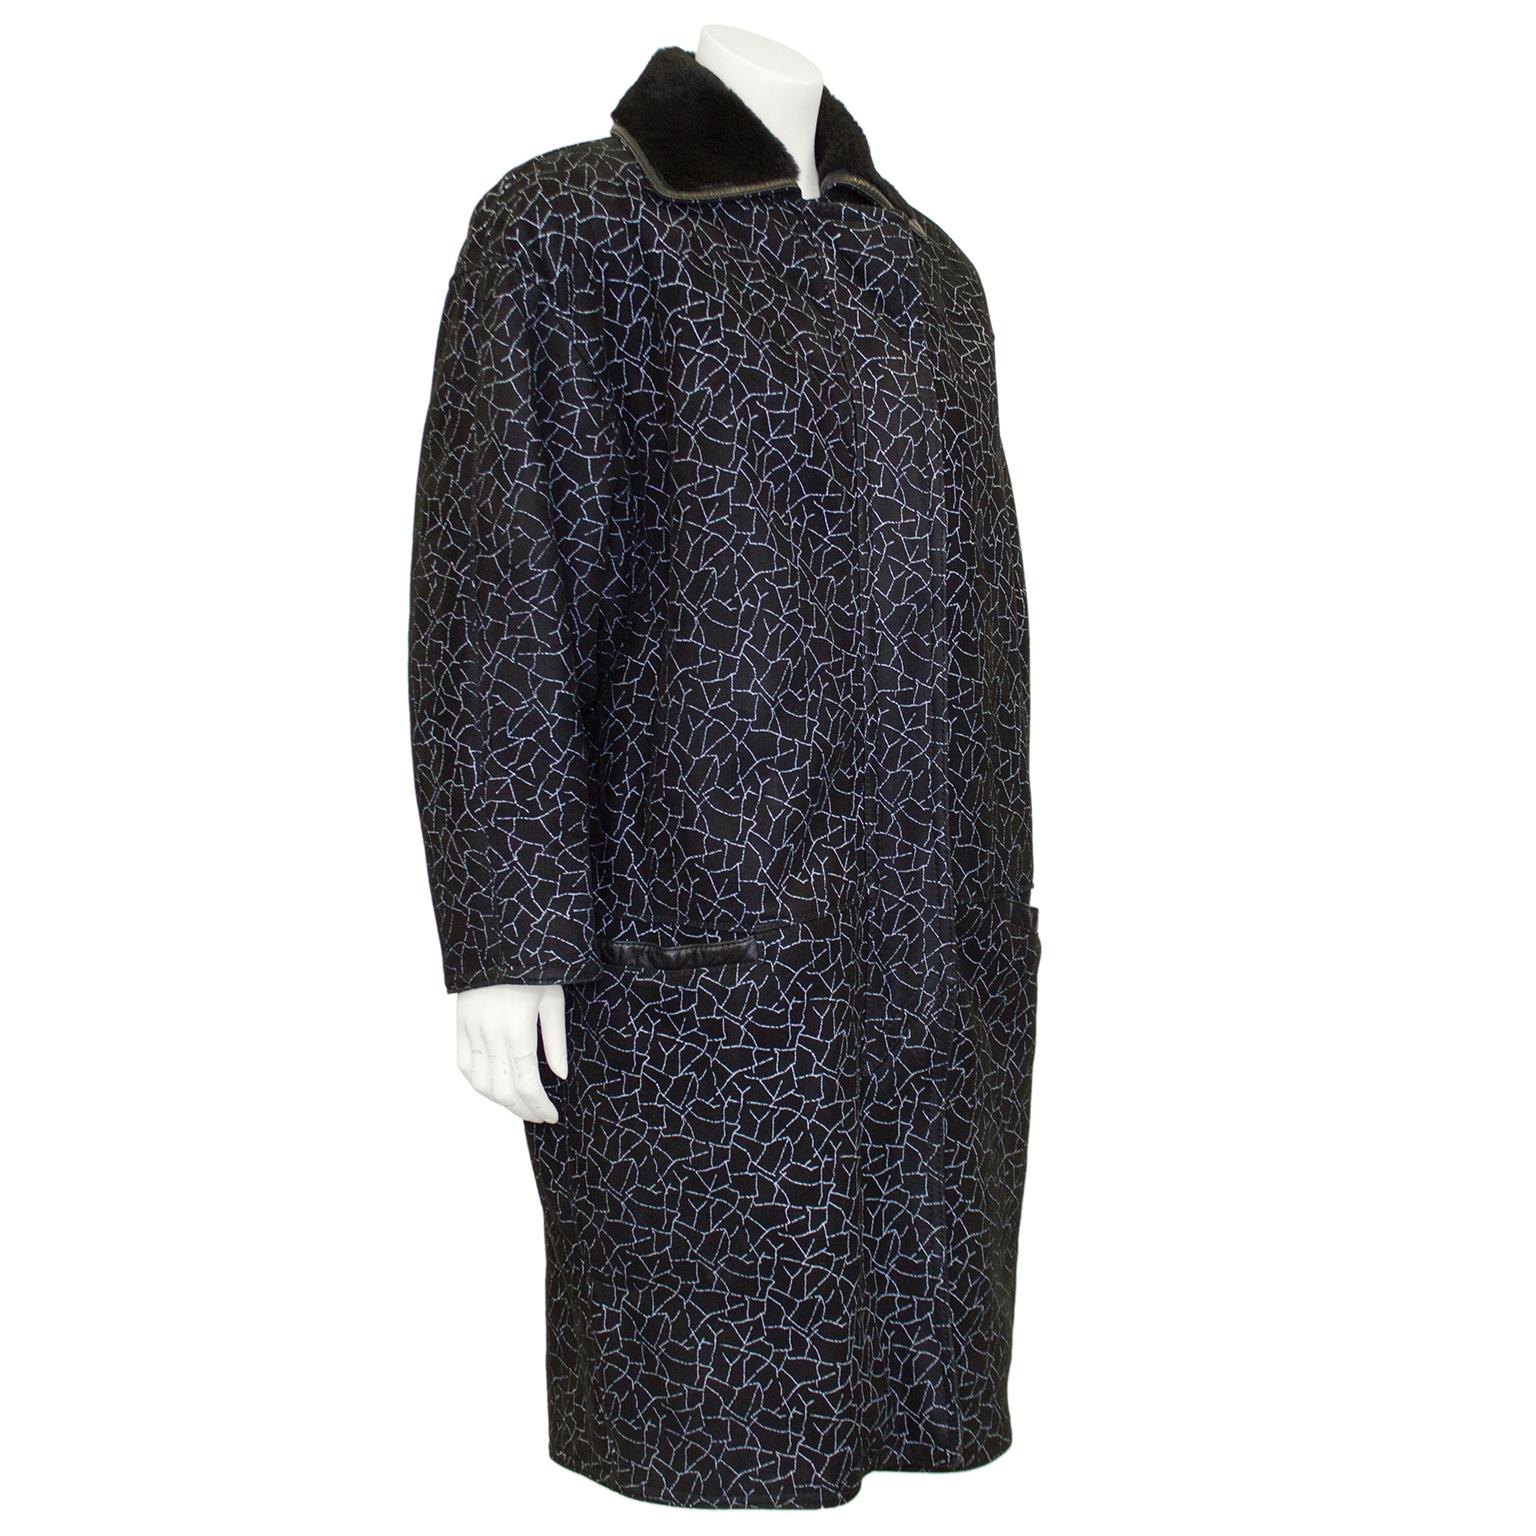 Gianni Versace shearling coat from the 1990s. Black suede with all over contrasting white crackle style print. Slight cocoon shape with dolman sleeves and horizontal slit pockets with black leather trim. Black shearling interior and collar with